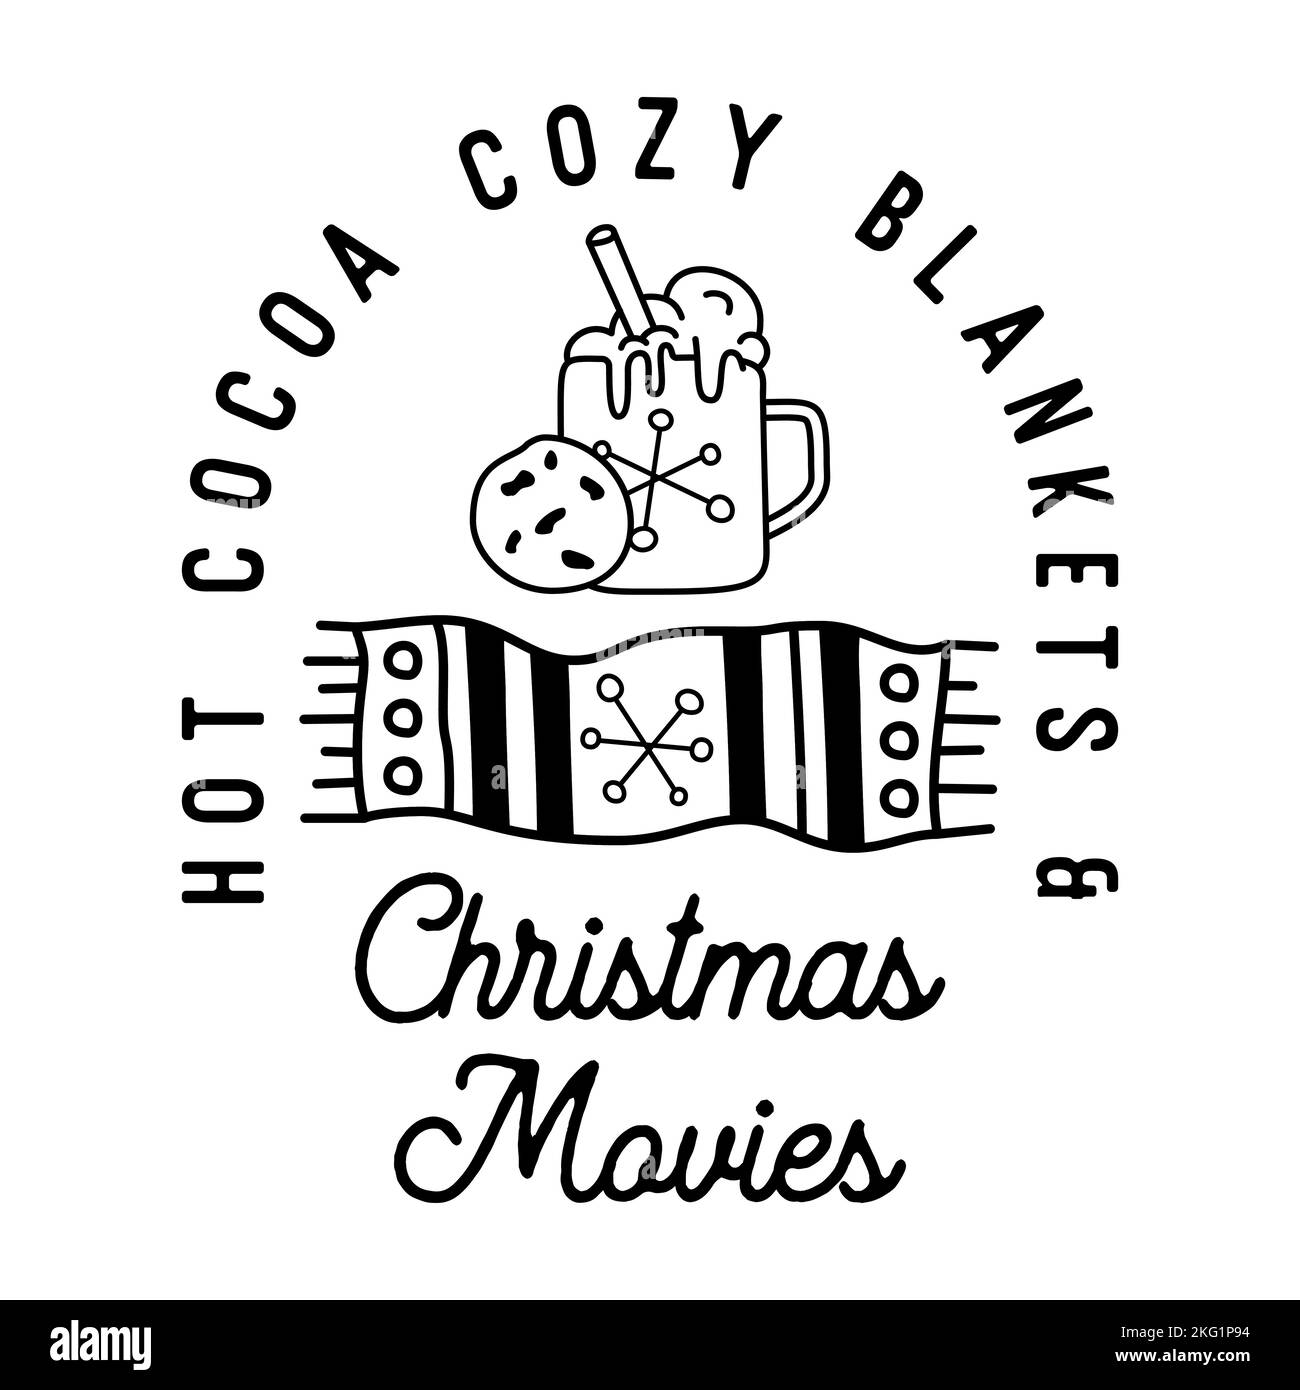 Mountain Camping christmas badge design with scarf and cup in line art style and quote hot cocoa cozy blankets and Christmas movies. Travel logo Stock Vector